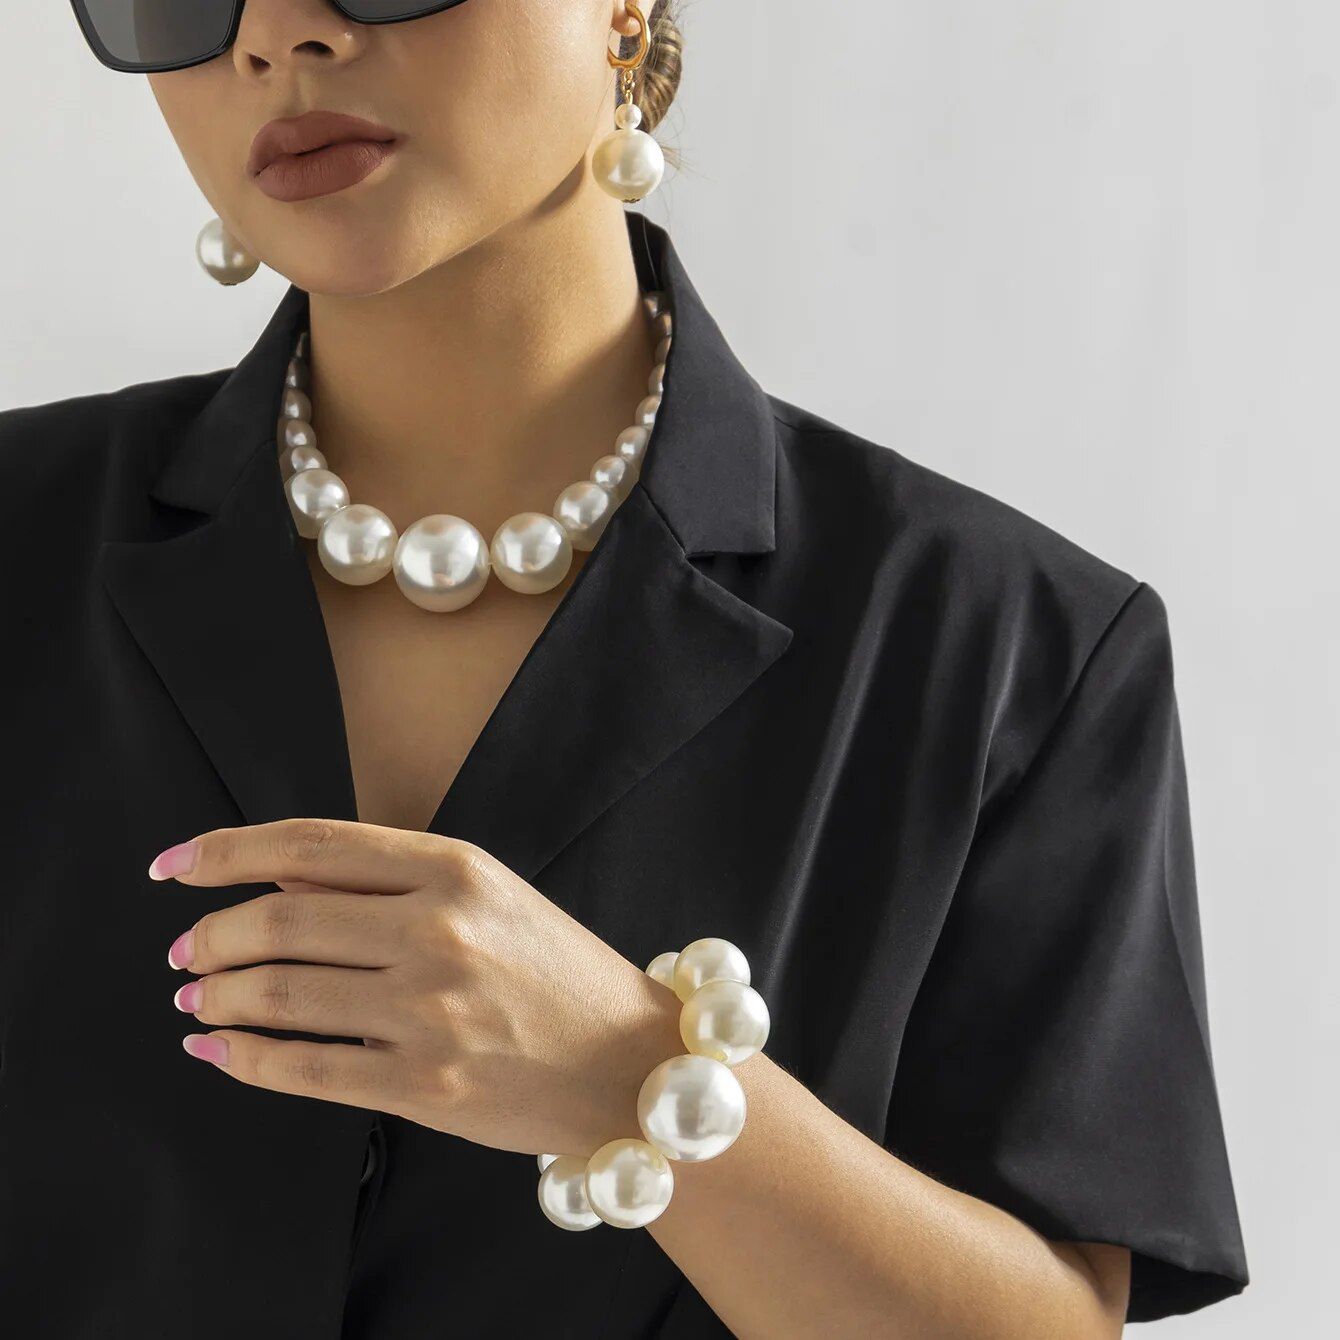 A woman in sunglasses and a black shirt adorned with a Womens Round Pearl Charm Bracelet and necklace, touching her chin thoughtfully.